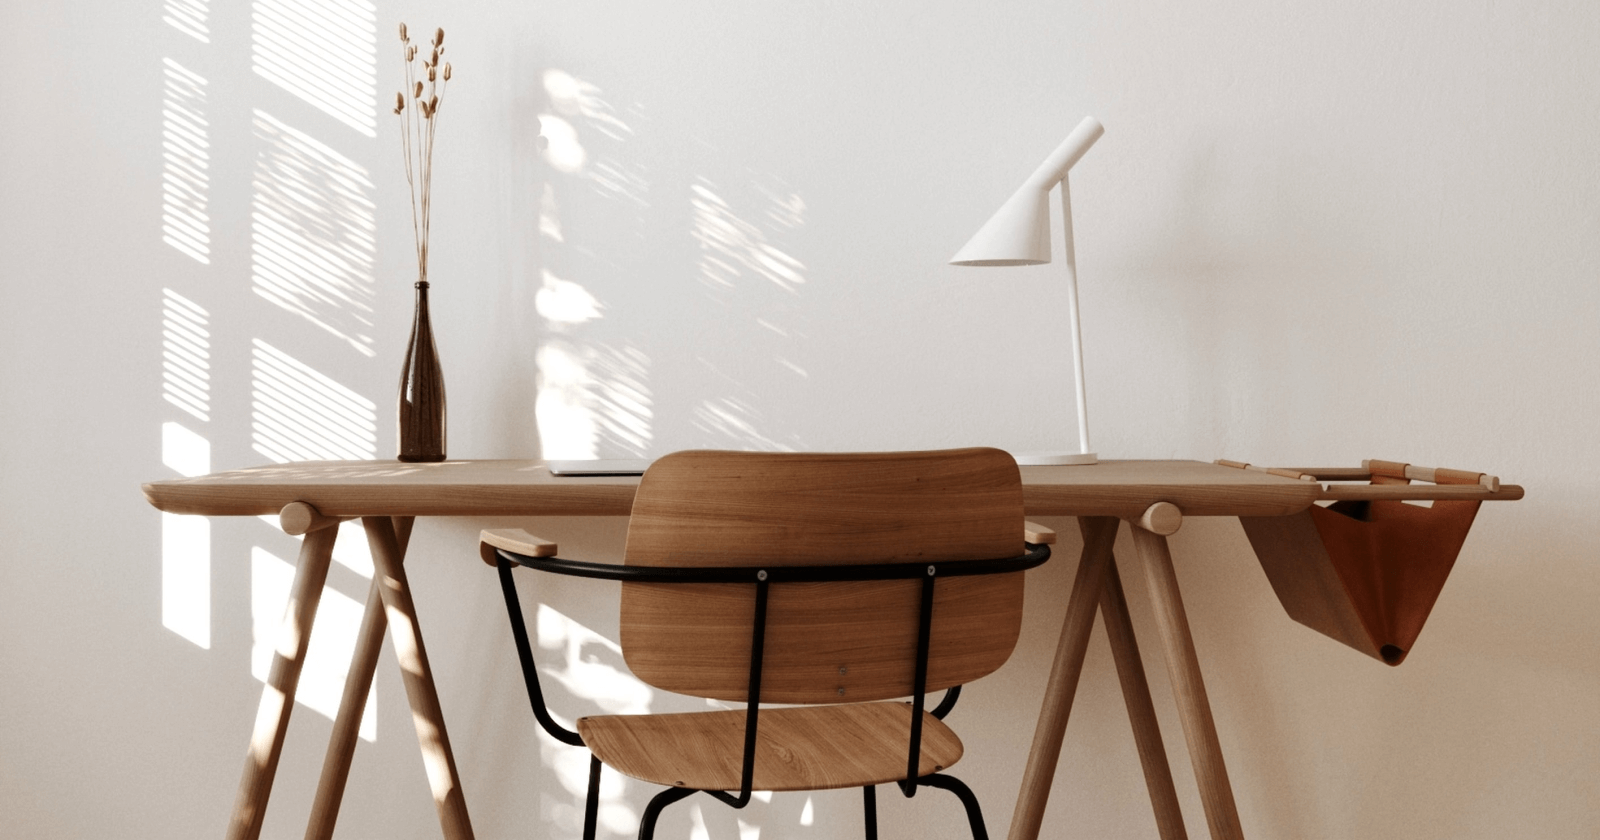 Minimal Style Wooden Desk Table and Wooden Chair